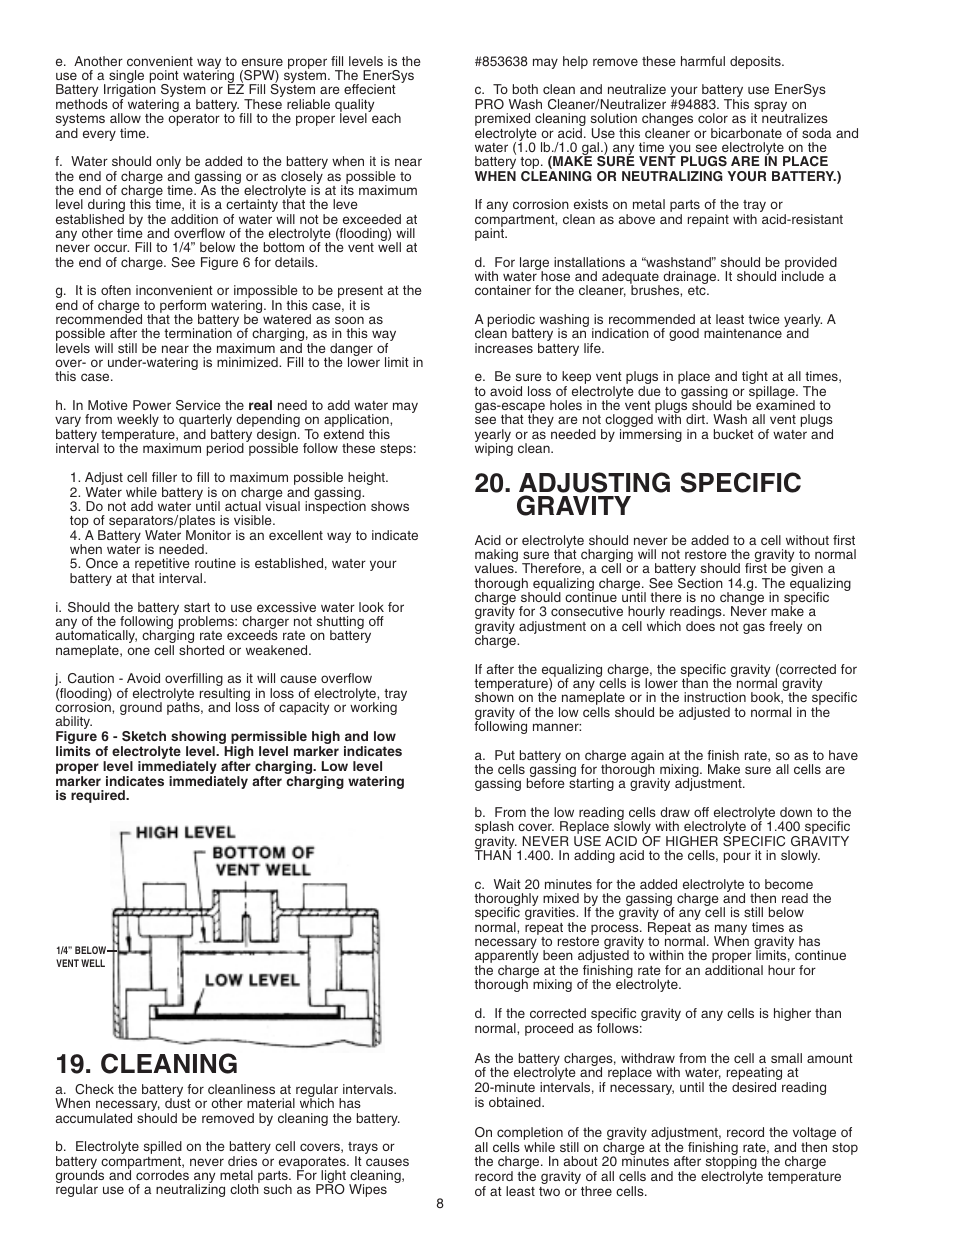 Cleaning, Adjusting specific gravity | Ironclad Automobile Parts User Manual | Page 8 / 11